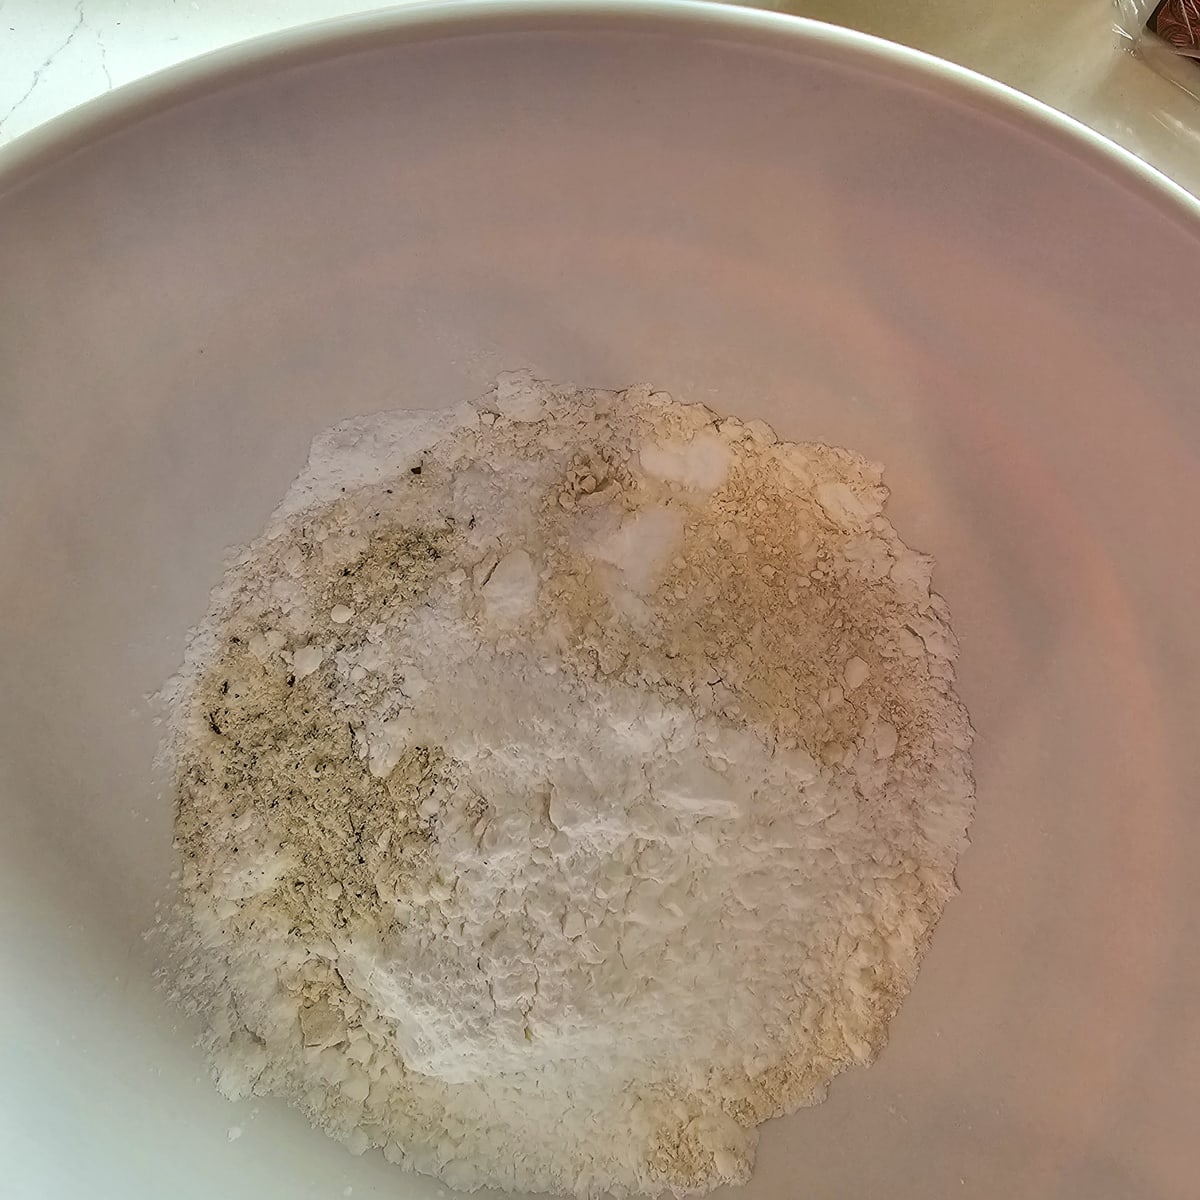 Flour, cornstarch, and seasoning in a bowl.